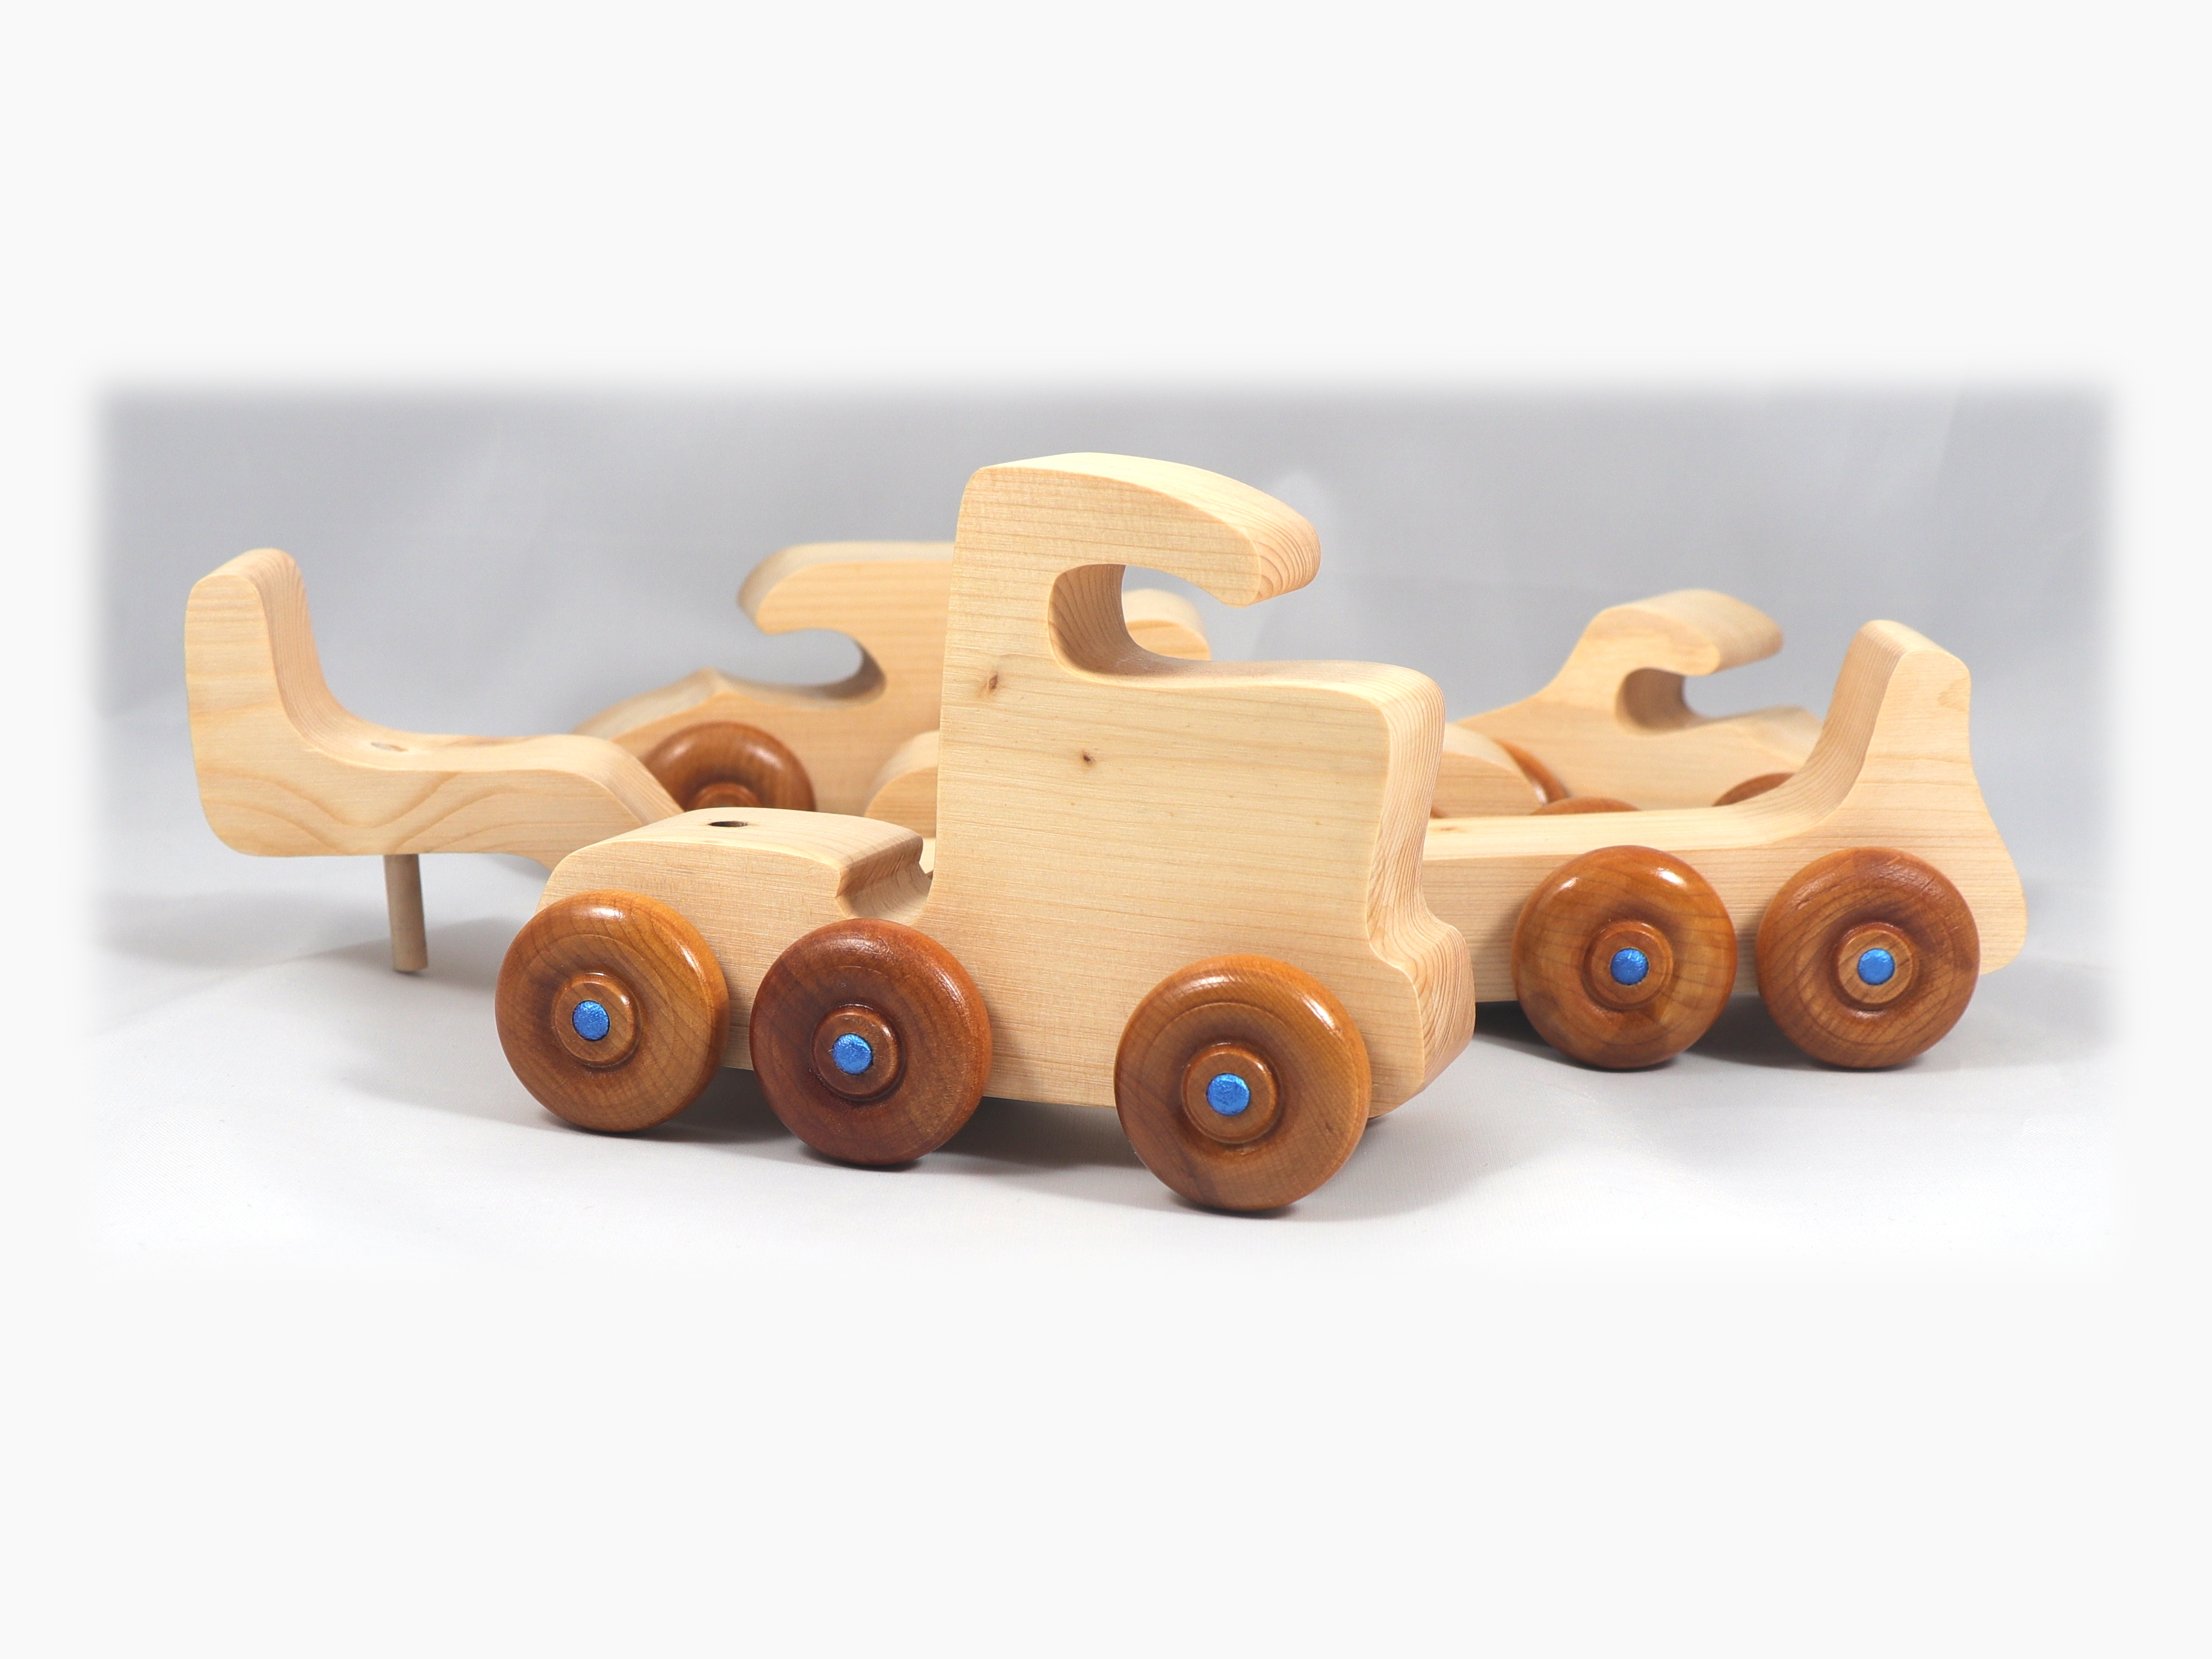 Handmade wooden toy truck play set includes three cars and a tractor-trailer finished with clear and amber shellac with metallic sapphire blue trim.